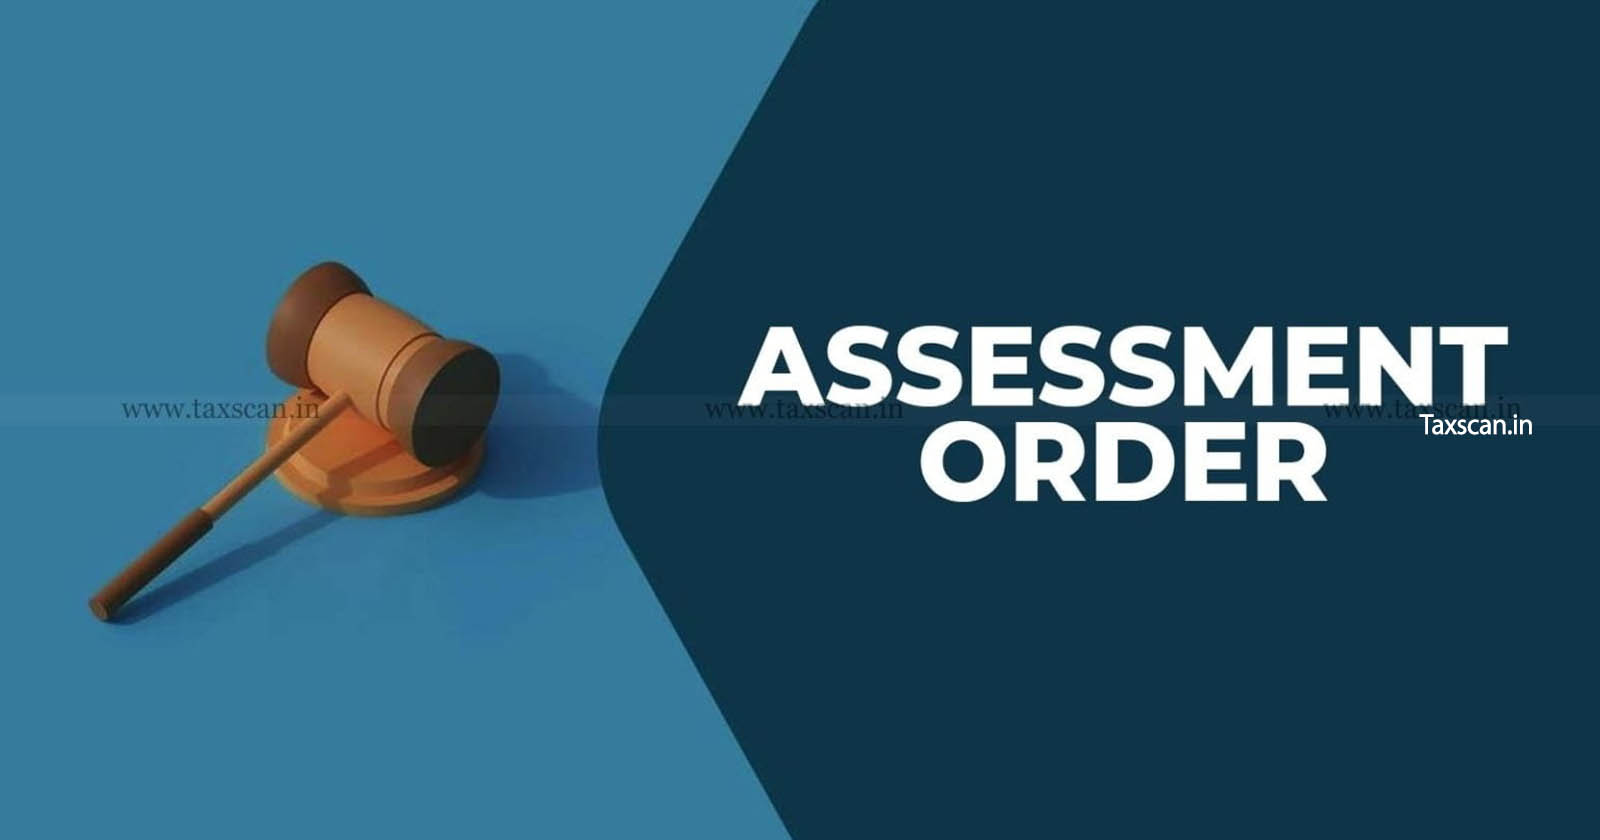 ITAT - quashes - assessment order - non-existent - Income - entity proven - null - void - taxscan